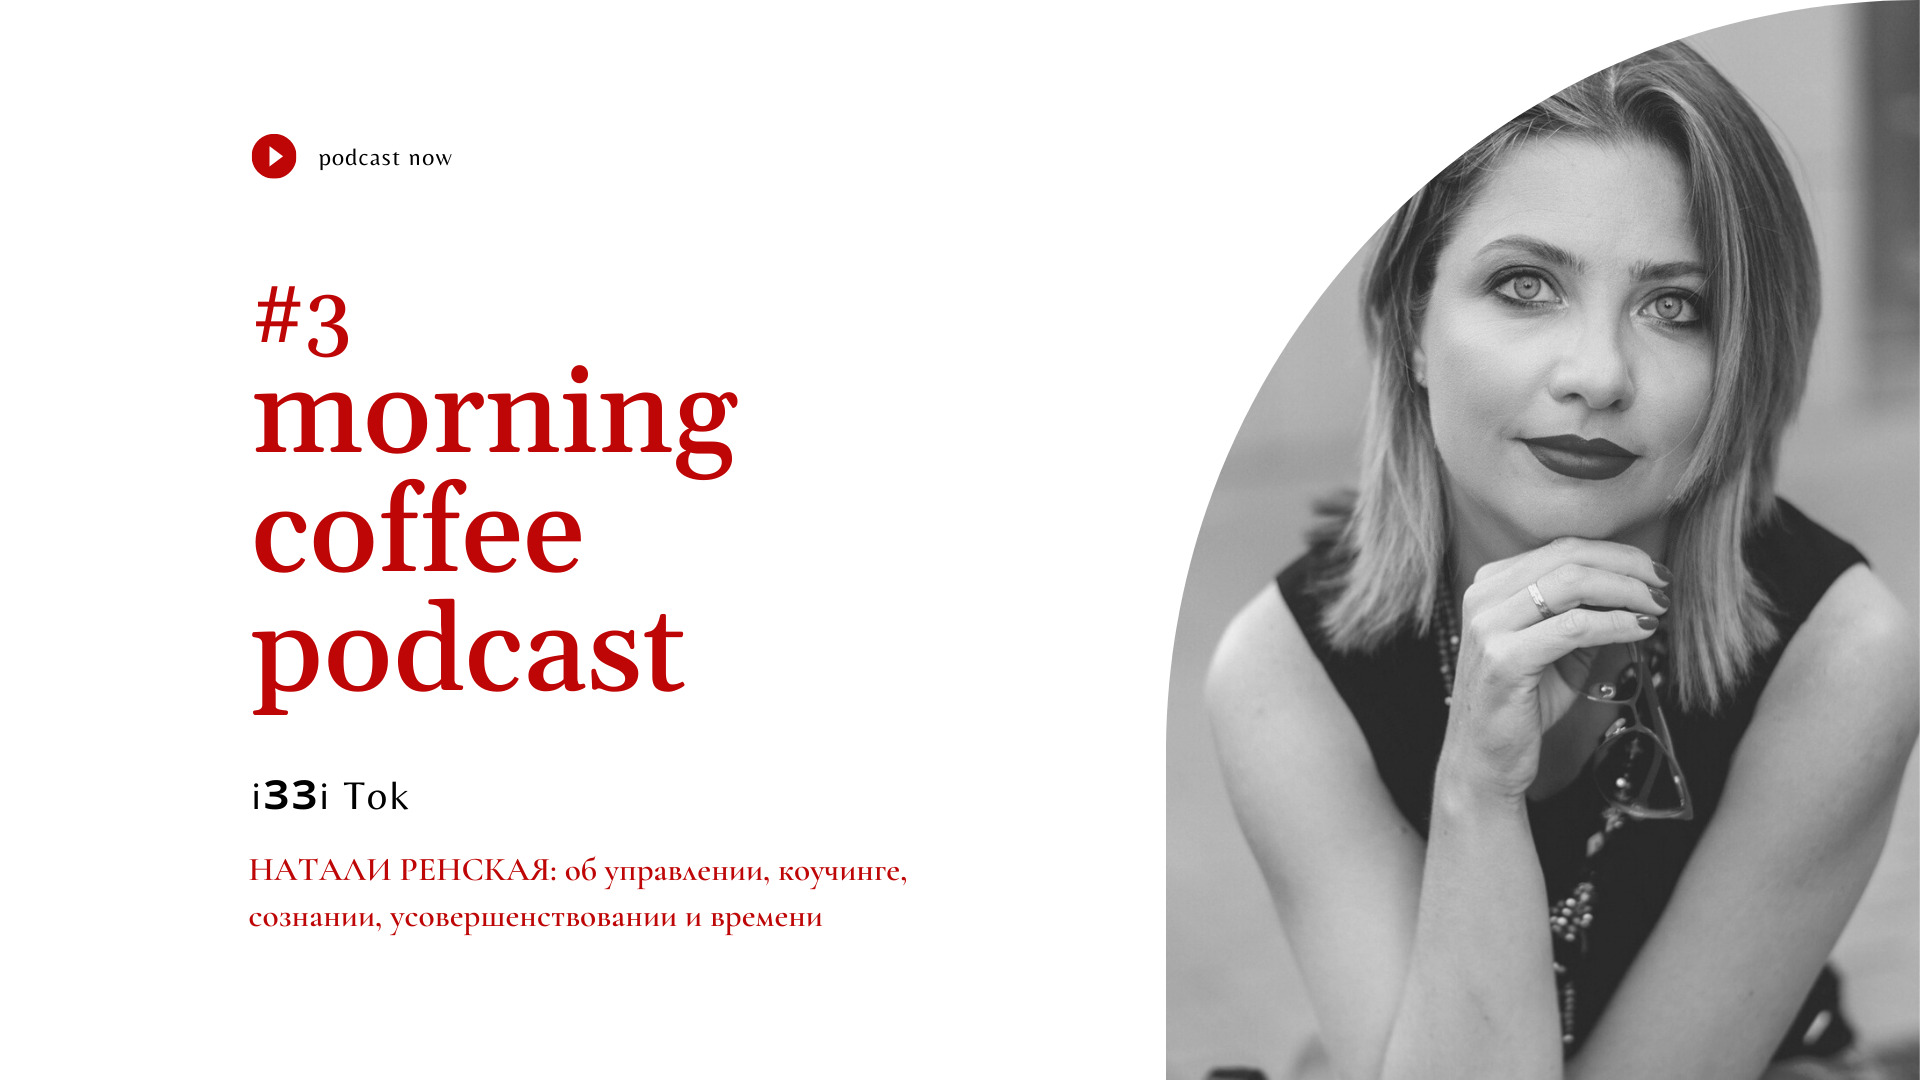 Morning Coffee Podcast _ CTj podcasts #3